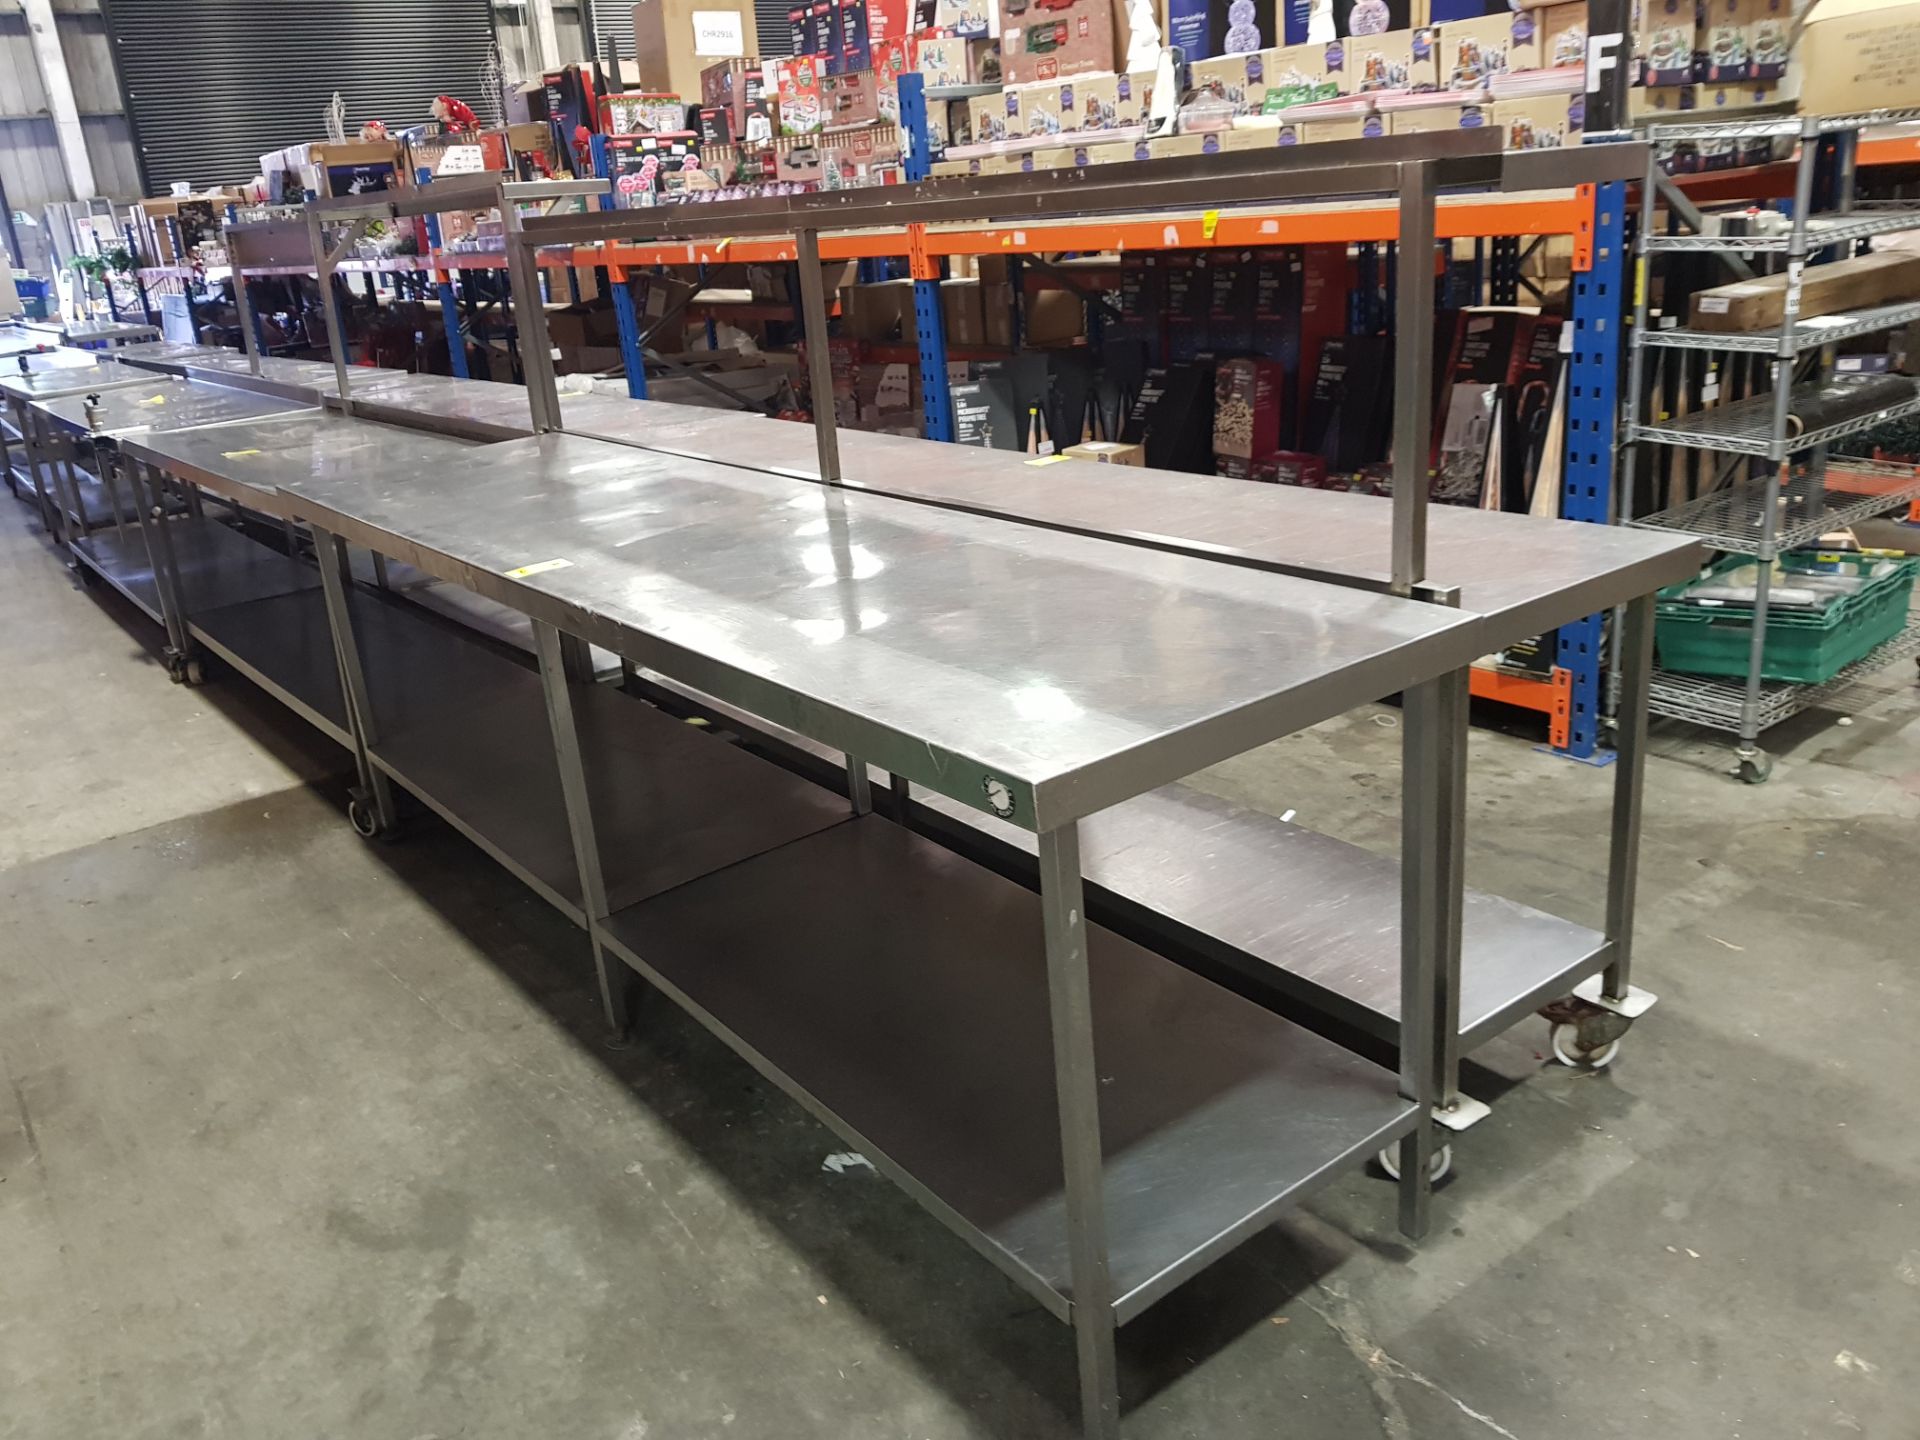 1 X STAINLESS STEEL TABLE / COUNTER ( DIMENSION : 270 CM LENGTH / 70 CM DEPTH / 92 CM HEIGHT )